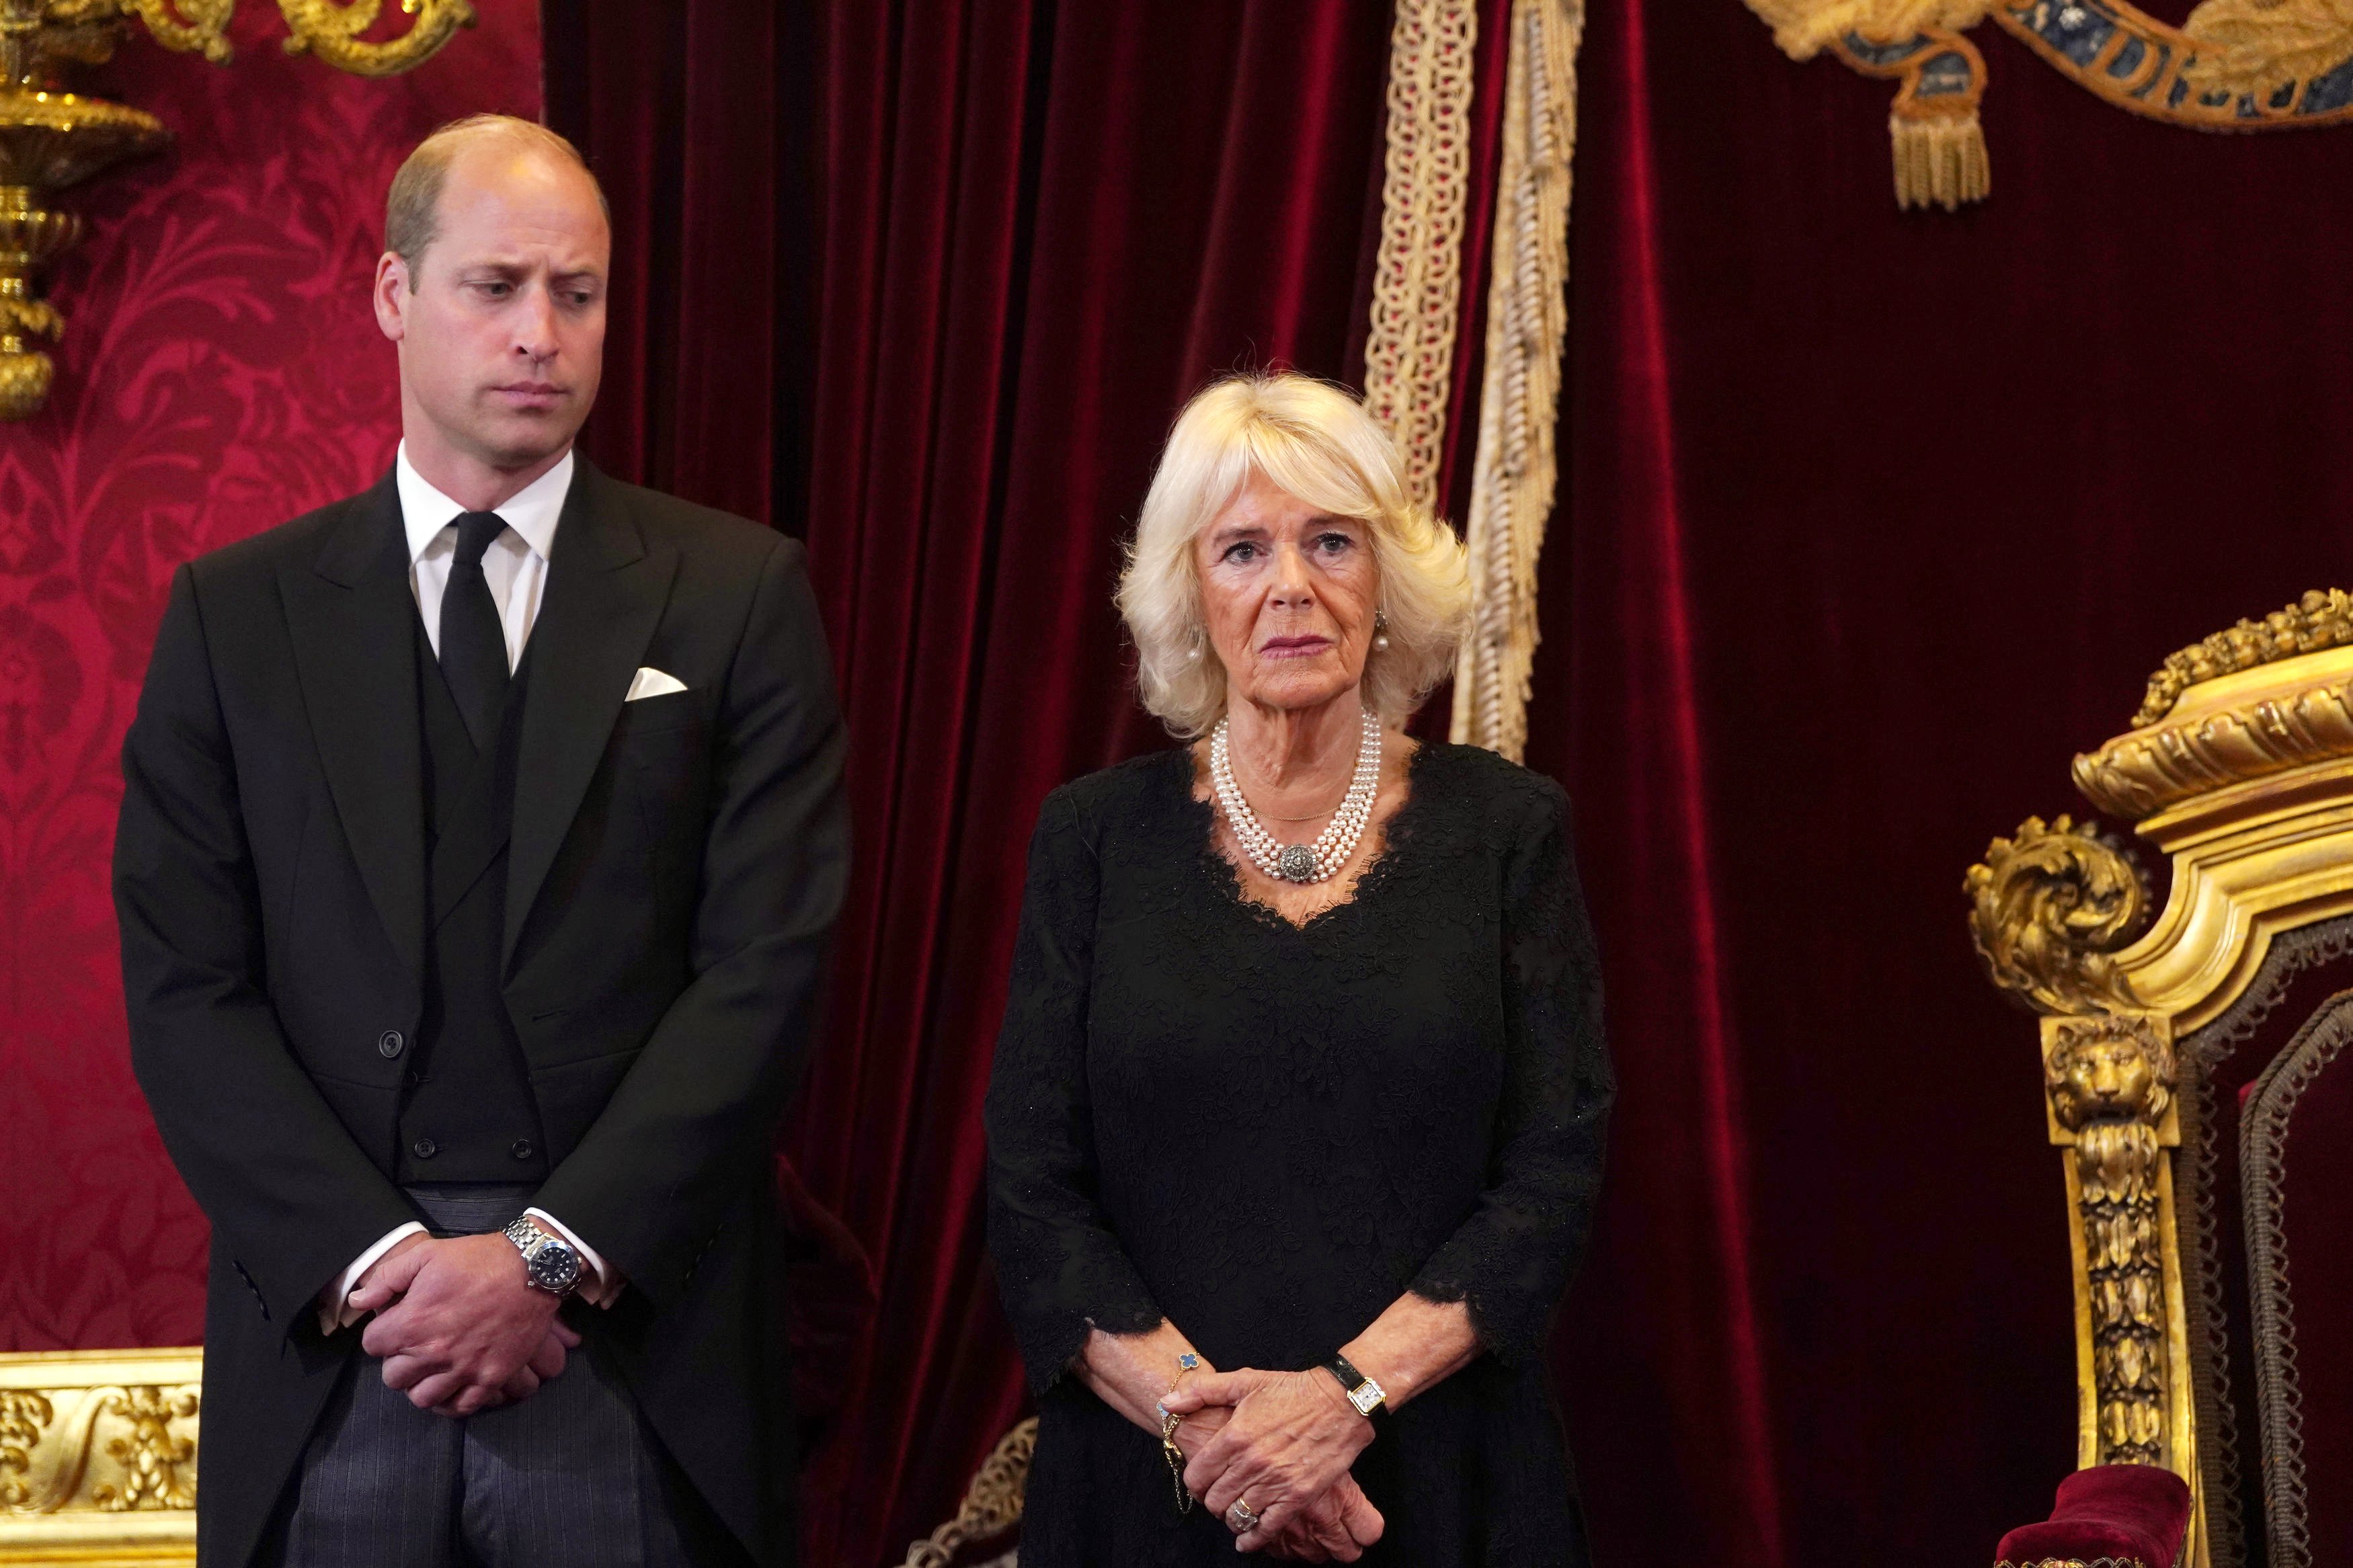 Prince William, and Camilla, Queen Consort during the accession council on September 10, 2022 in London, United Kingdom ┃Source: Getty Images